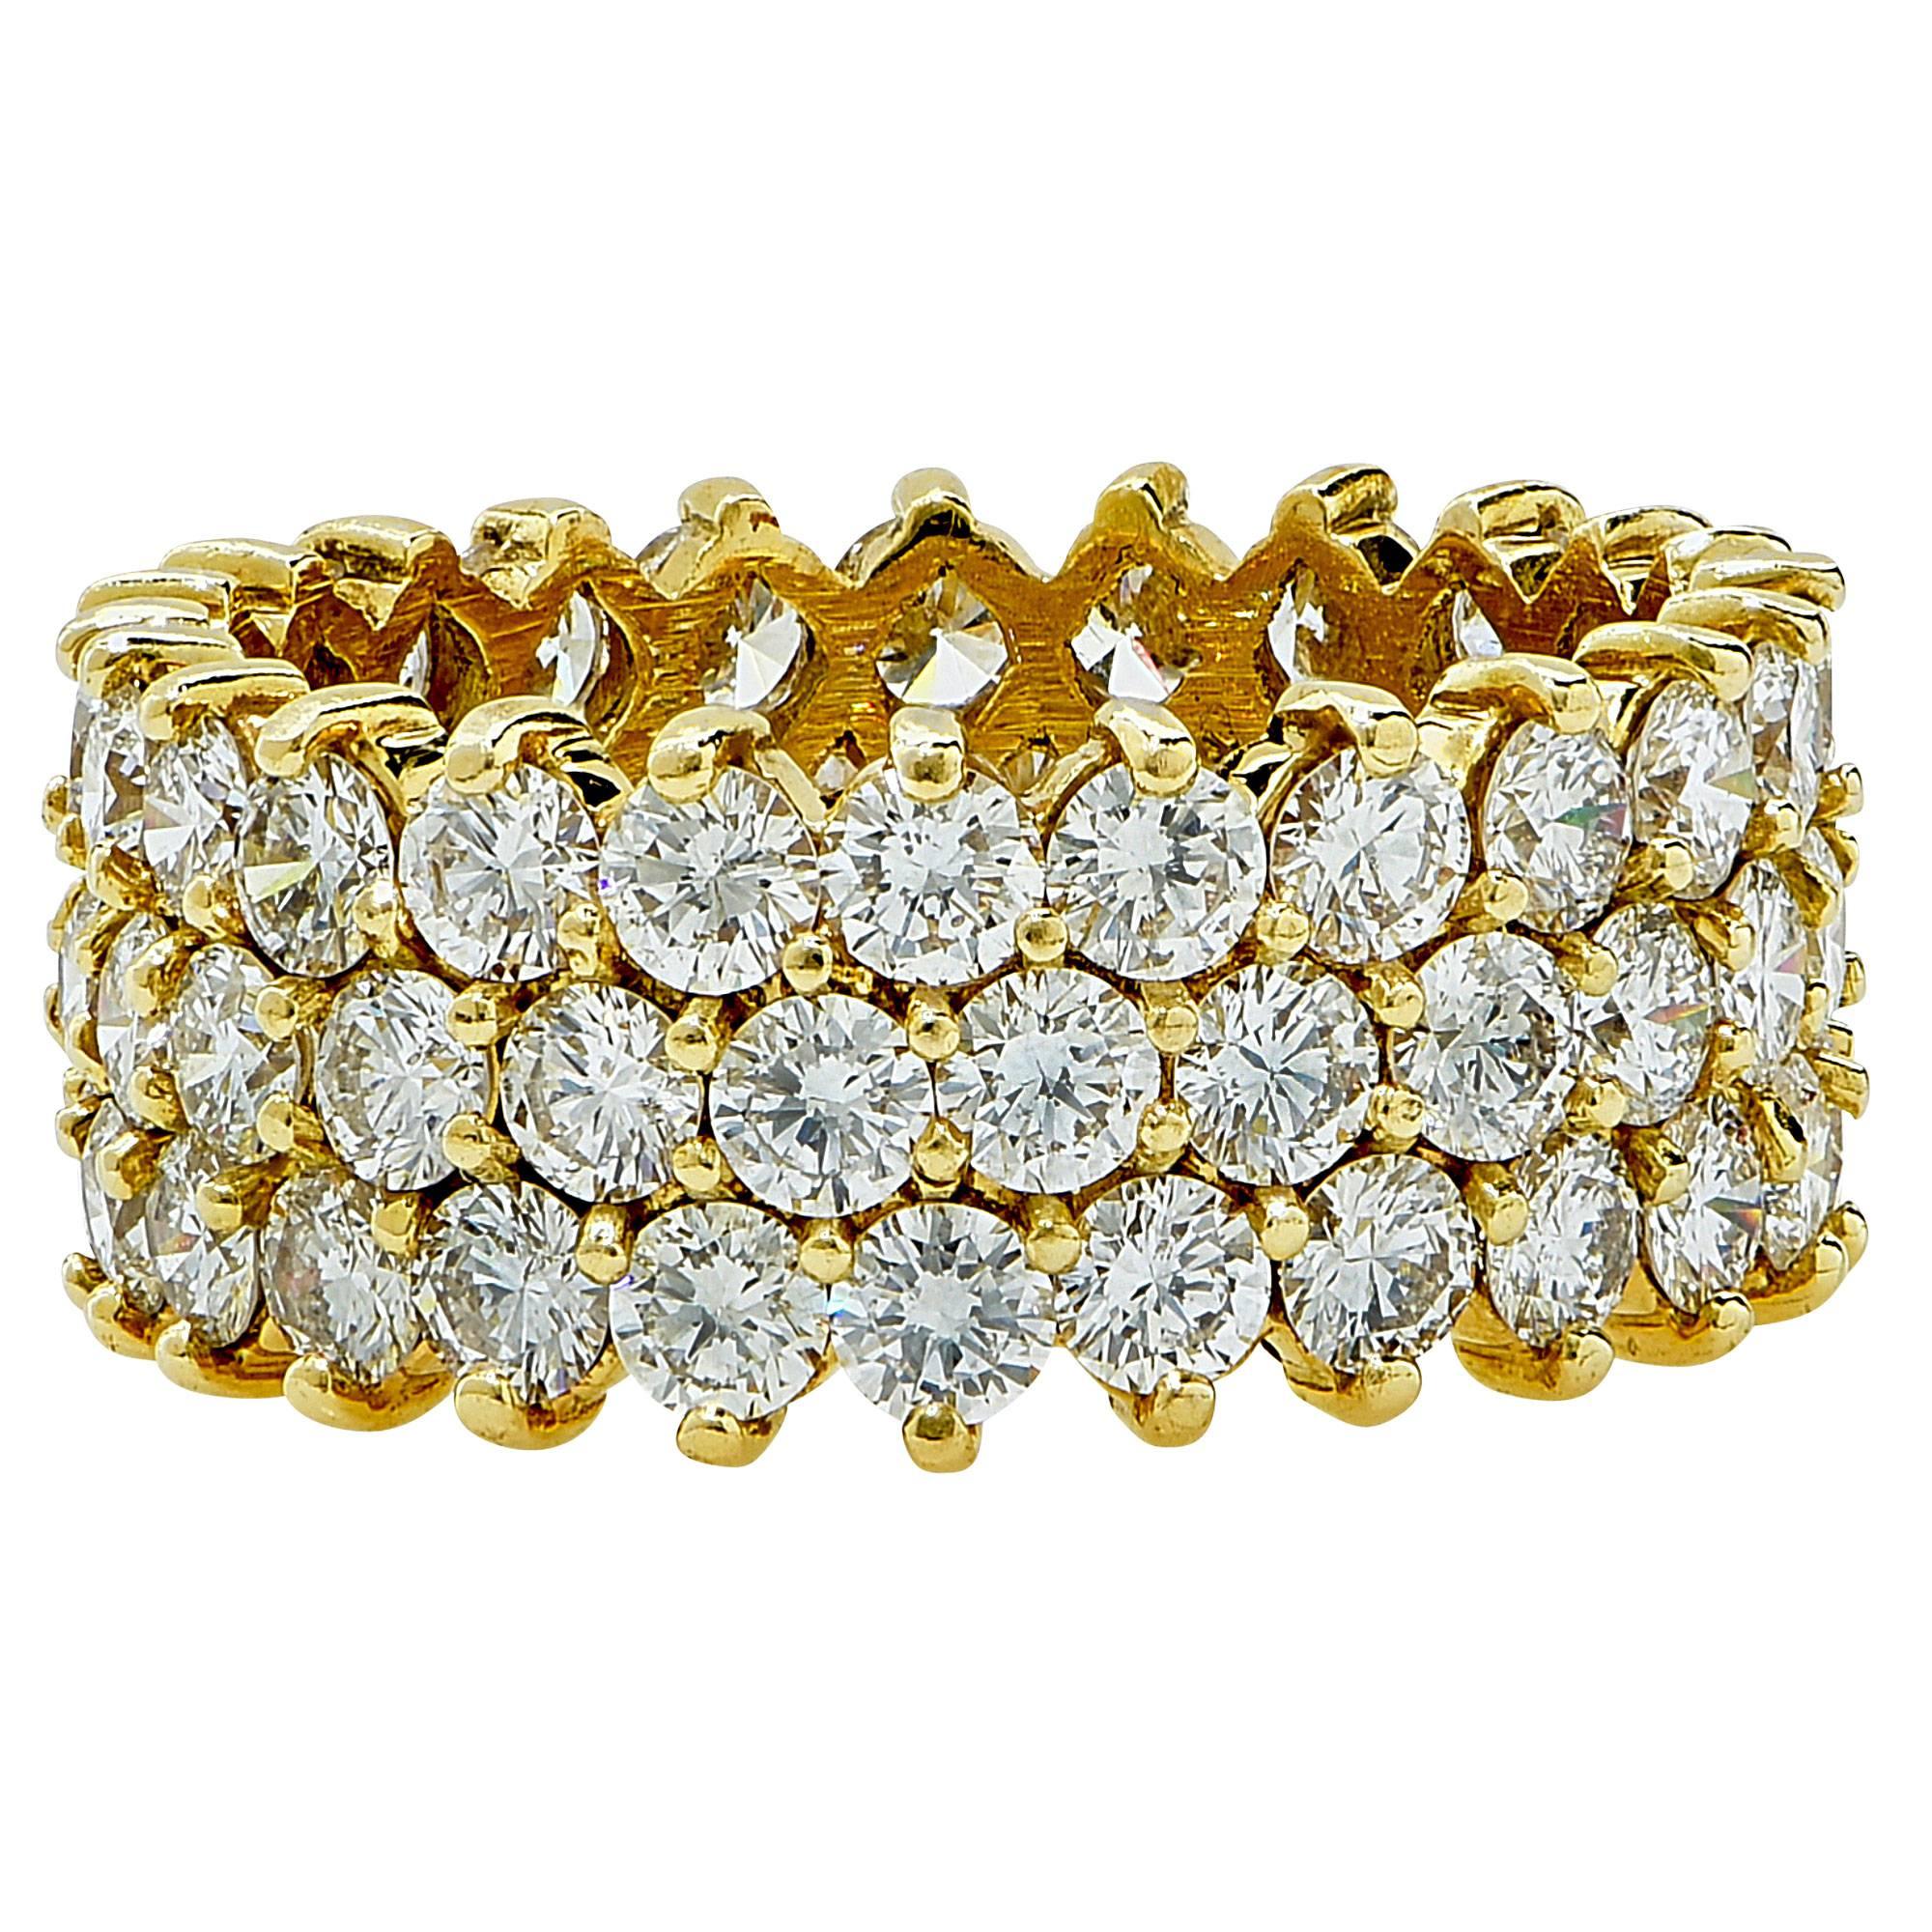 18k yellow gold band featuring 75 round brilliant cut diamonds weighing approximately 3.75cts total, F color VS clarity. 

Metal weight: 5.67 grams

This diamond wedding band is accompanied by a retail appraisal performed by a GIA Graduate